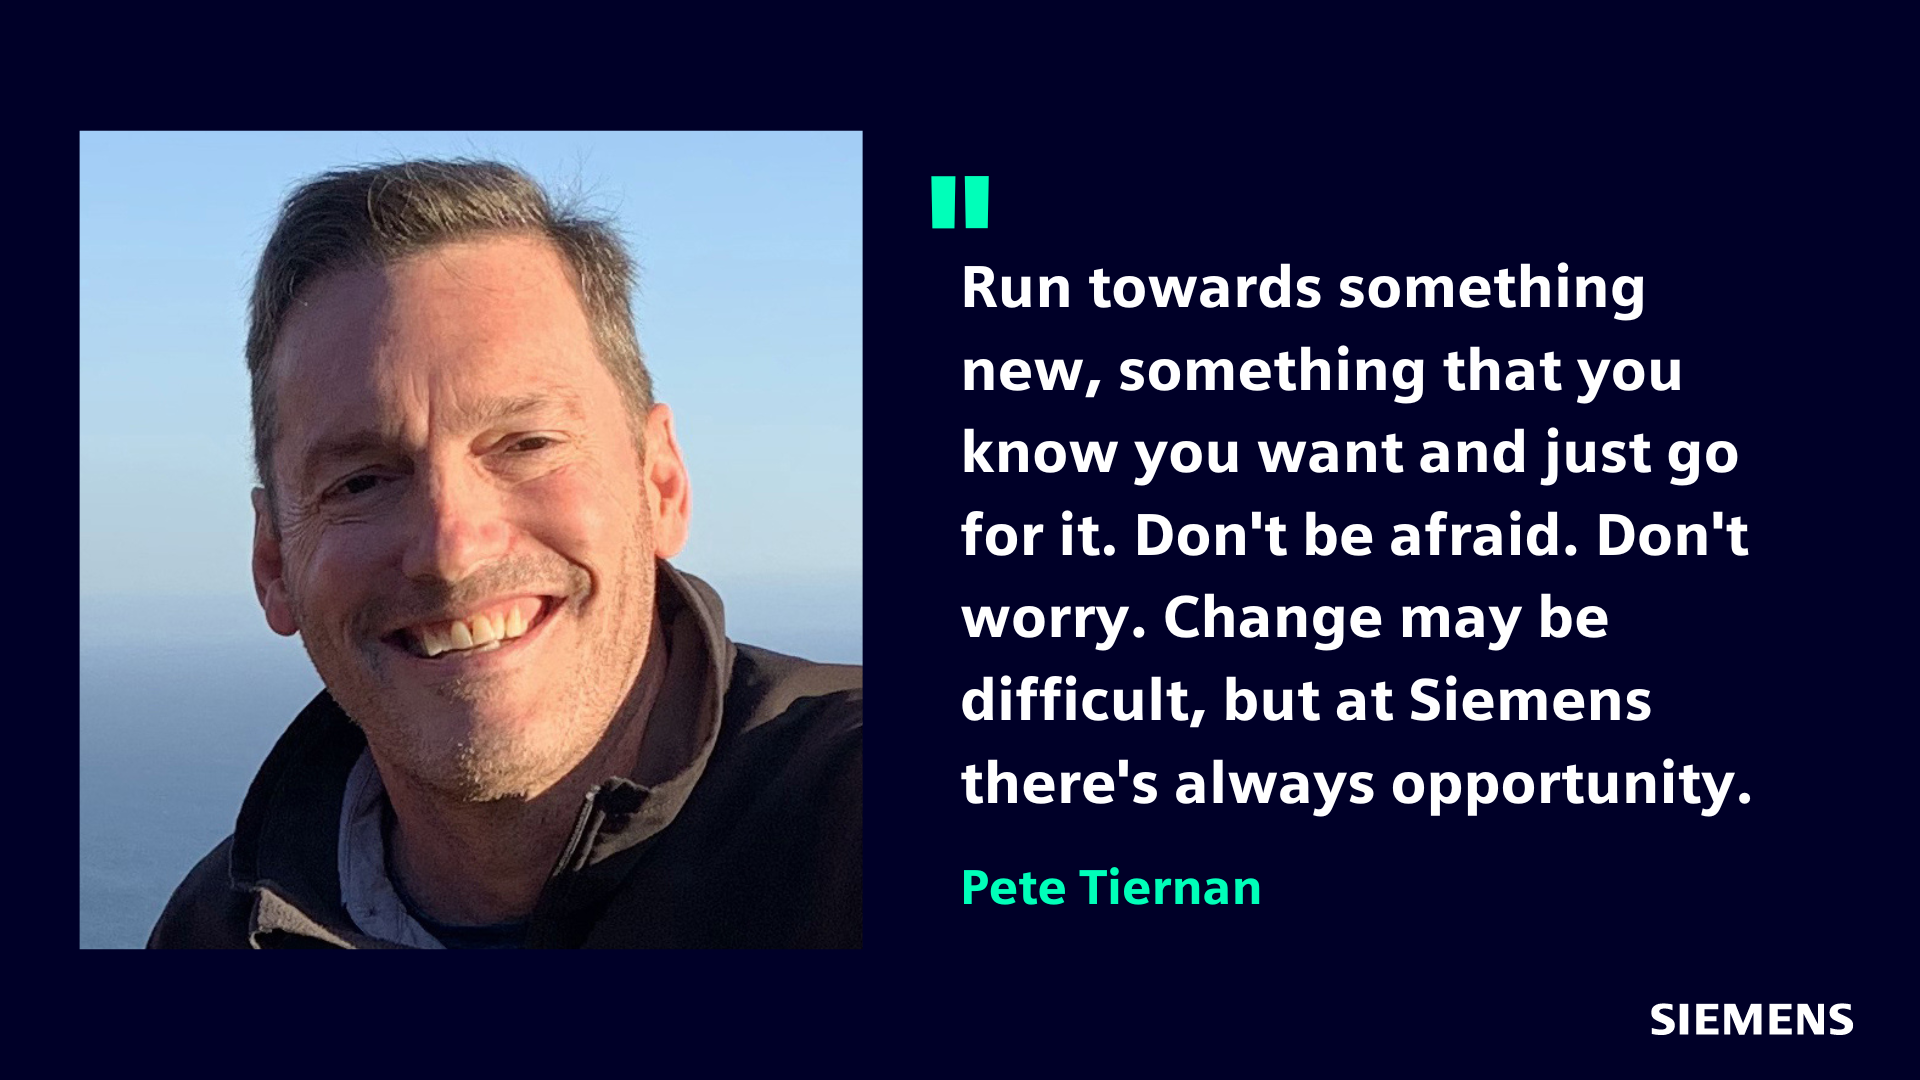 Pete Tiernan with quote